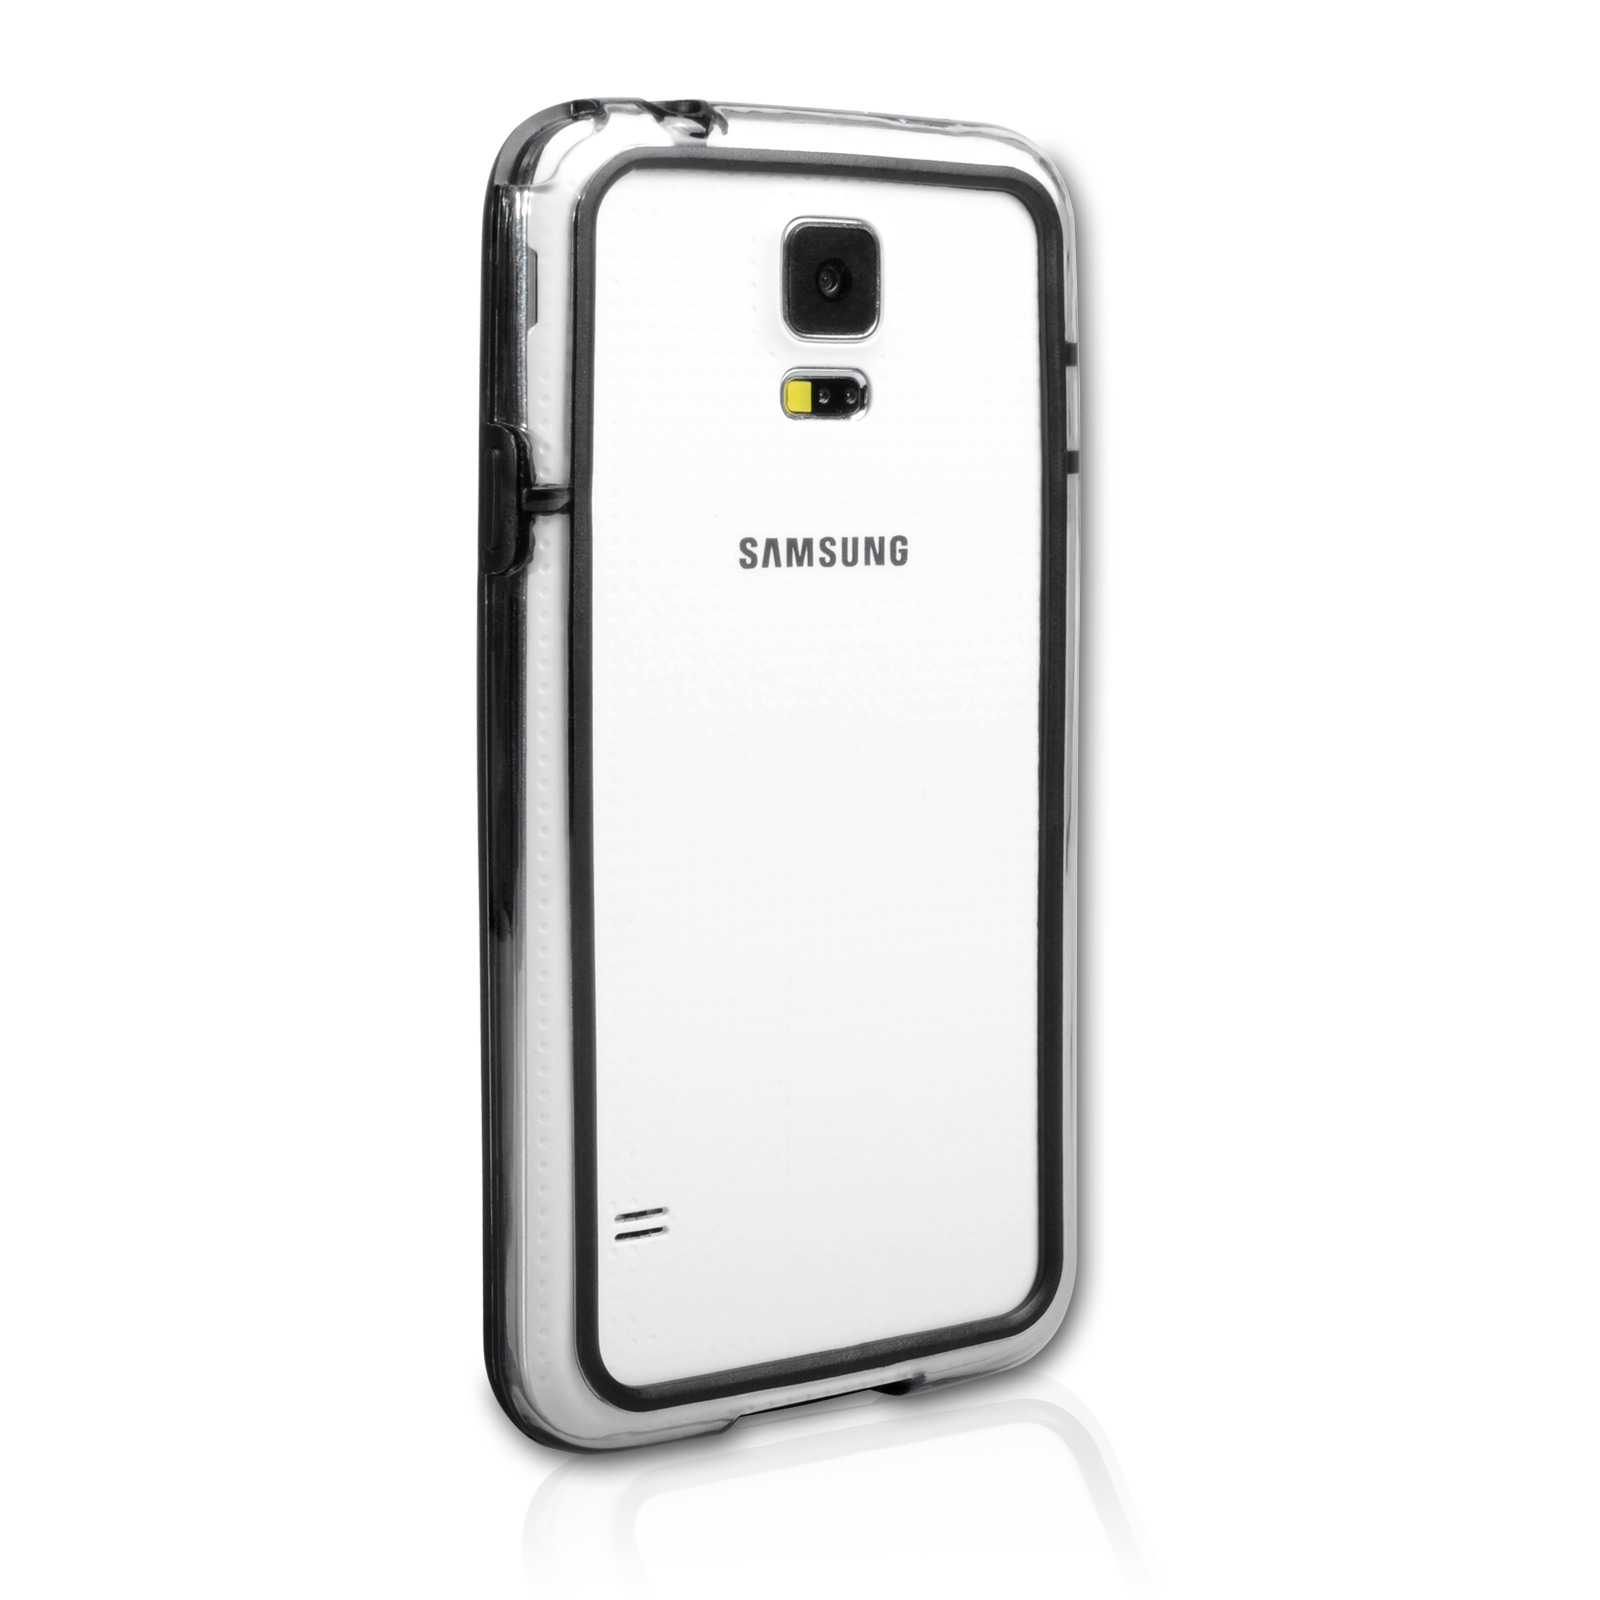 YouSave Accessories Samsung Galaxy S5 Bumper Case - Clear/Black